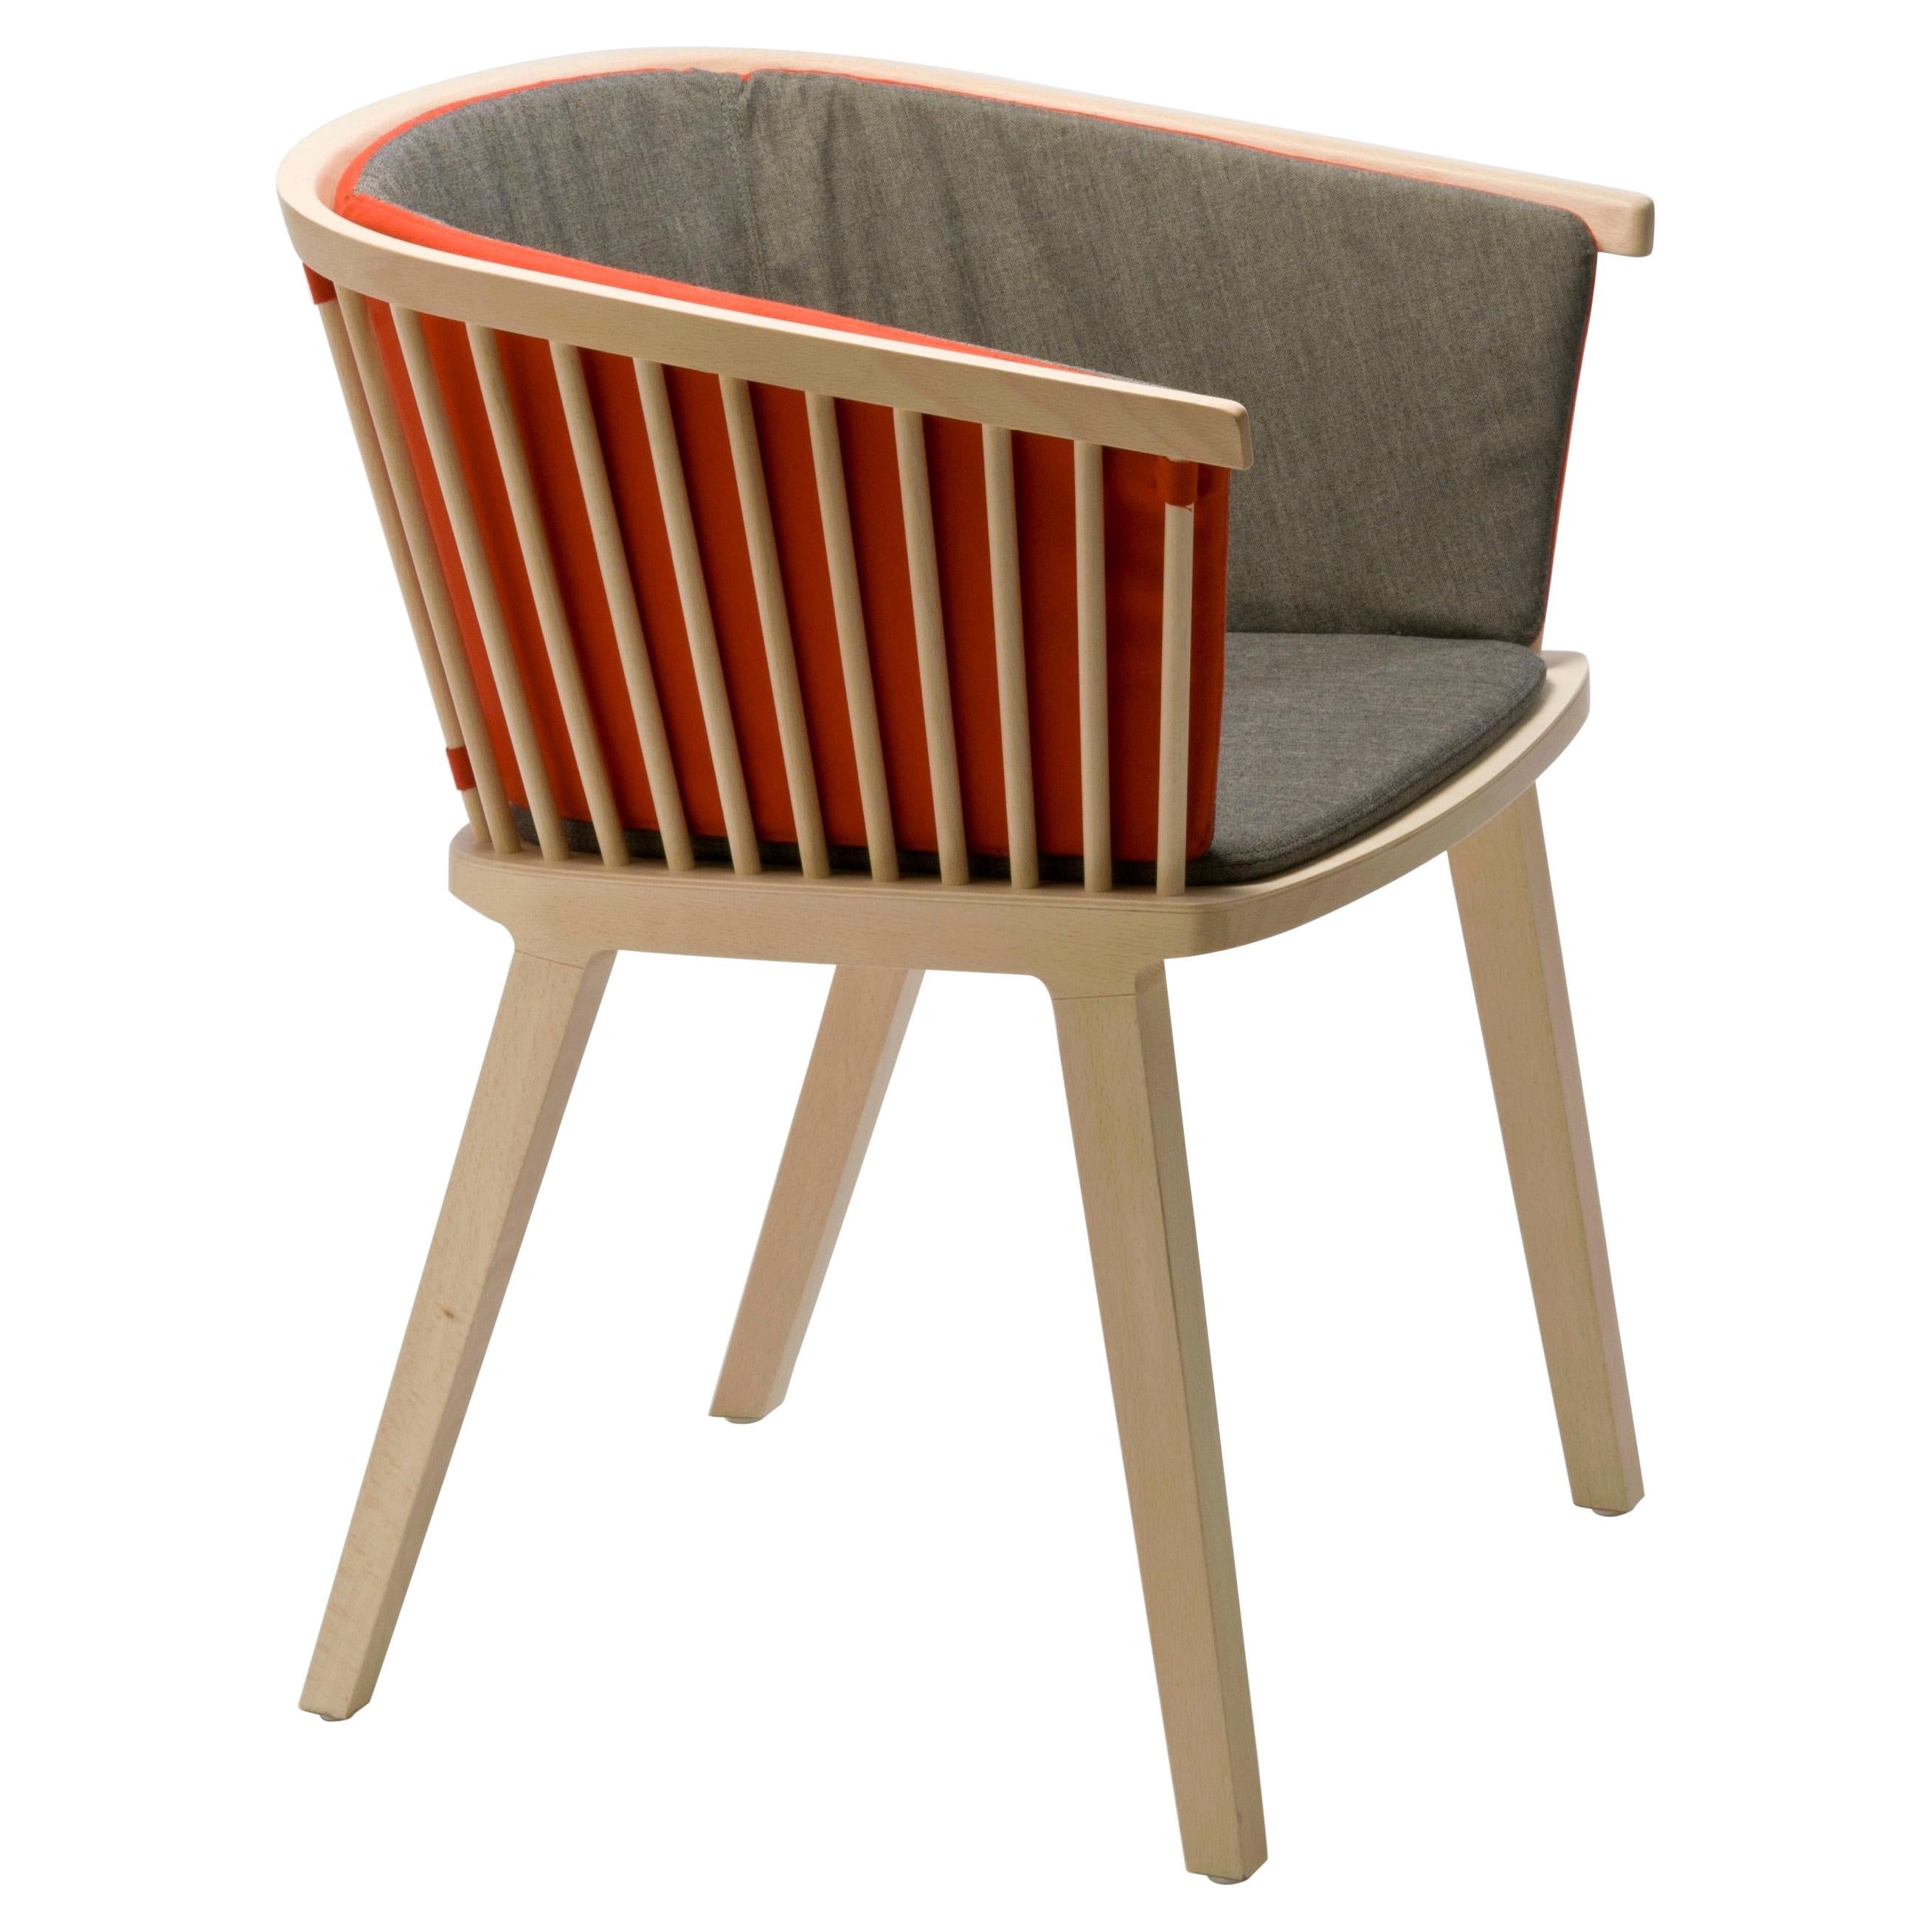 Secreto Armchair in Beech, double face Cushion Orange and Grey, Made in Italy